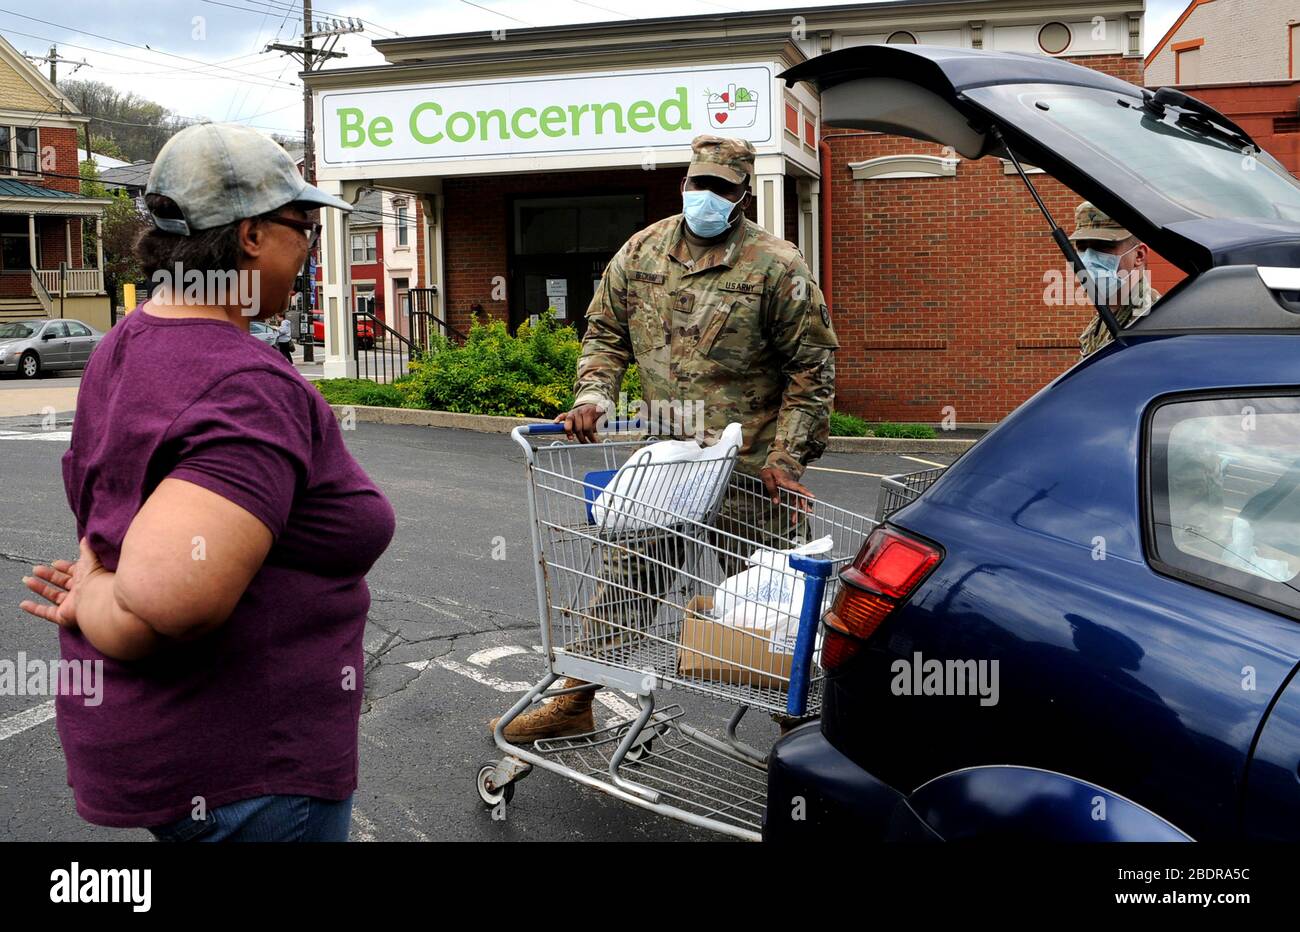 Kentucky National Guardsmen, helps load food aid at the Be Concerned food pantry to help with COVID-19, coronavirus pandemic relief April 8, 2020 in Covington, Kentucky. Stock Photo